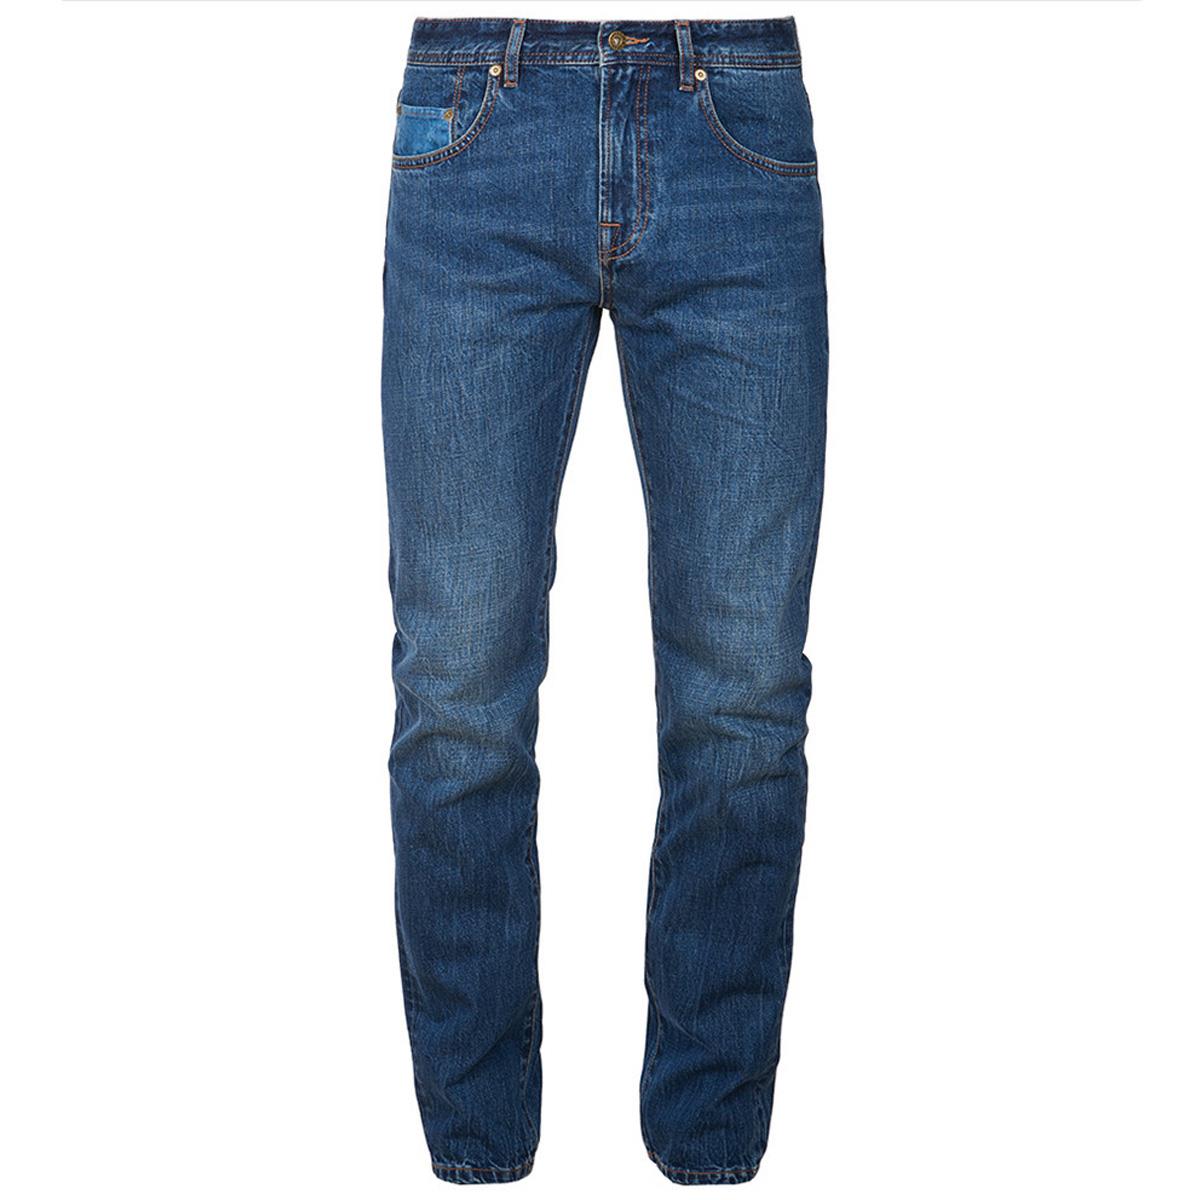 What are the characteristics of Barbour mens jeans in regular fit?